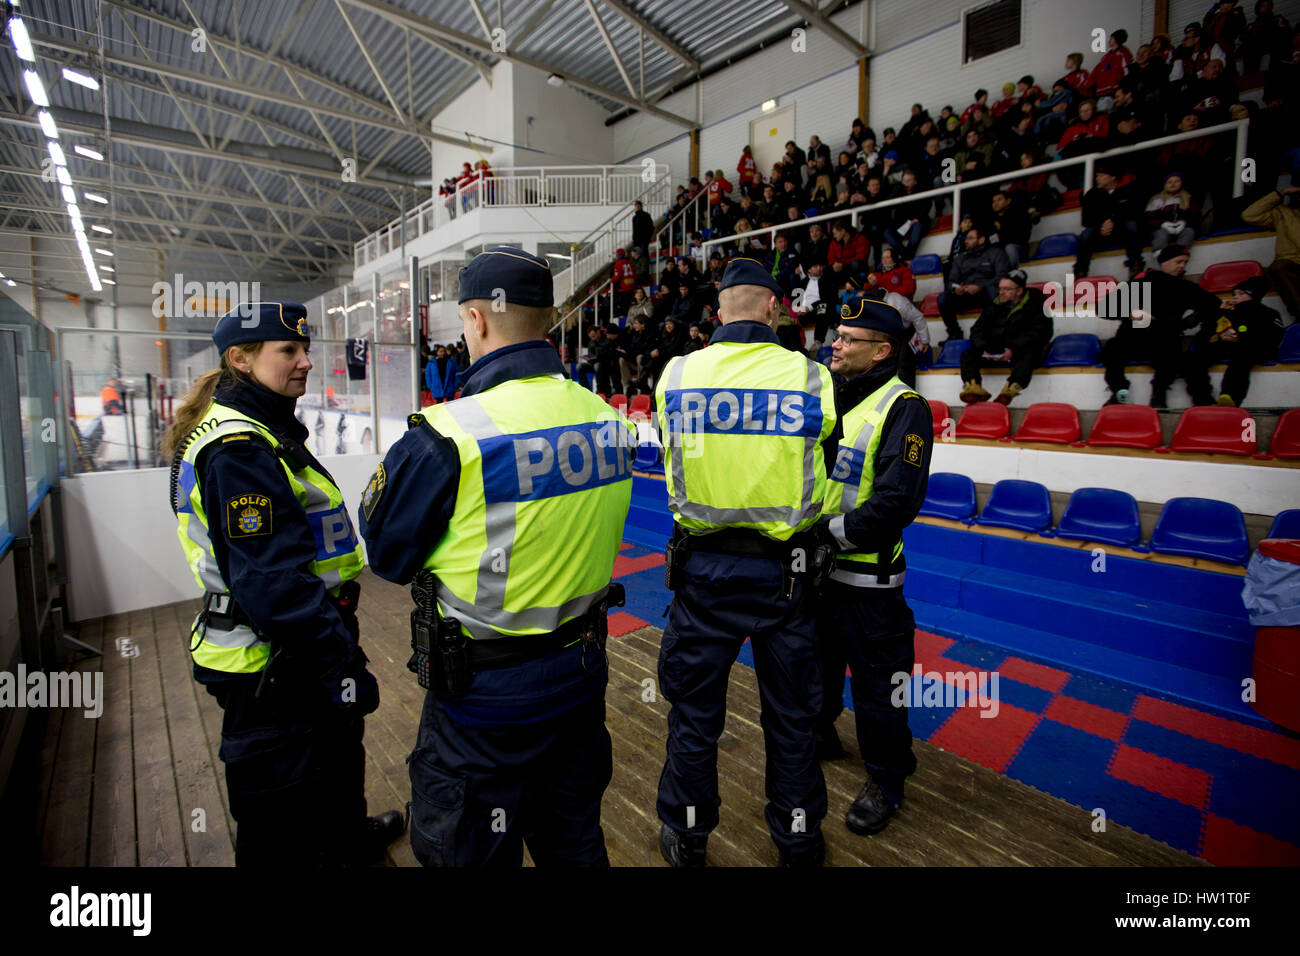 The police keep order during an ice hockey game, Sollentuna, Sweden. Stock Photo